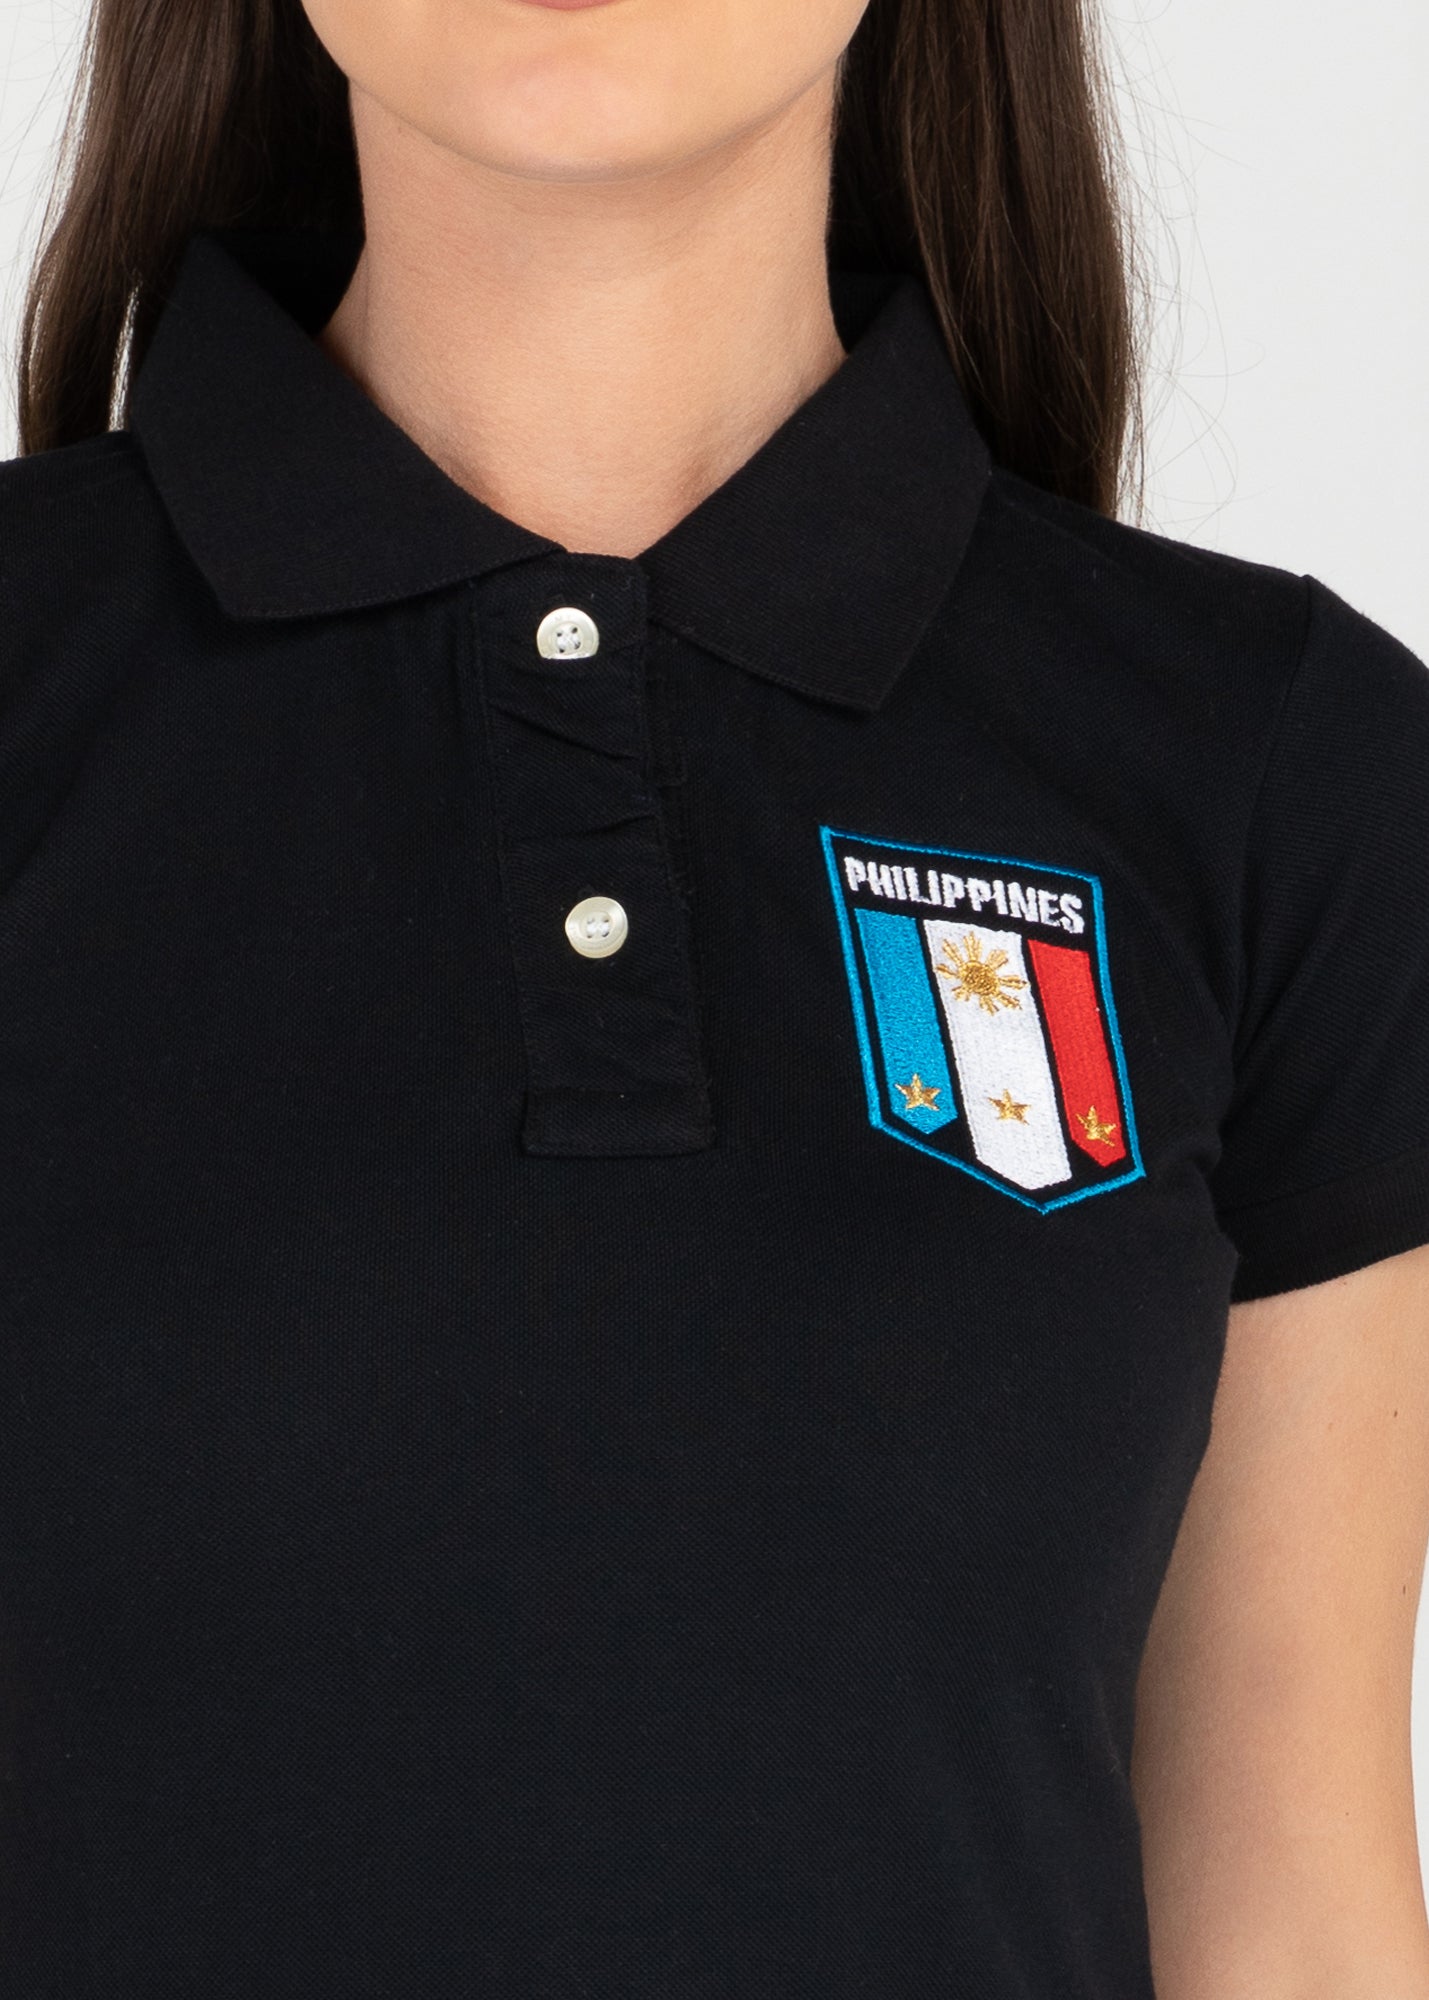 Crest Polo for Ladies